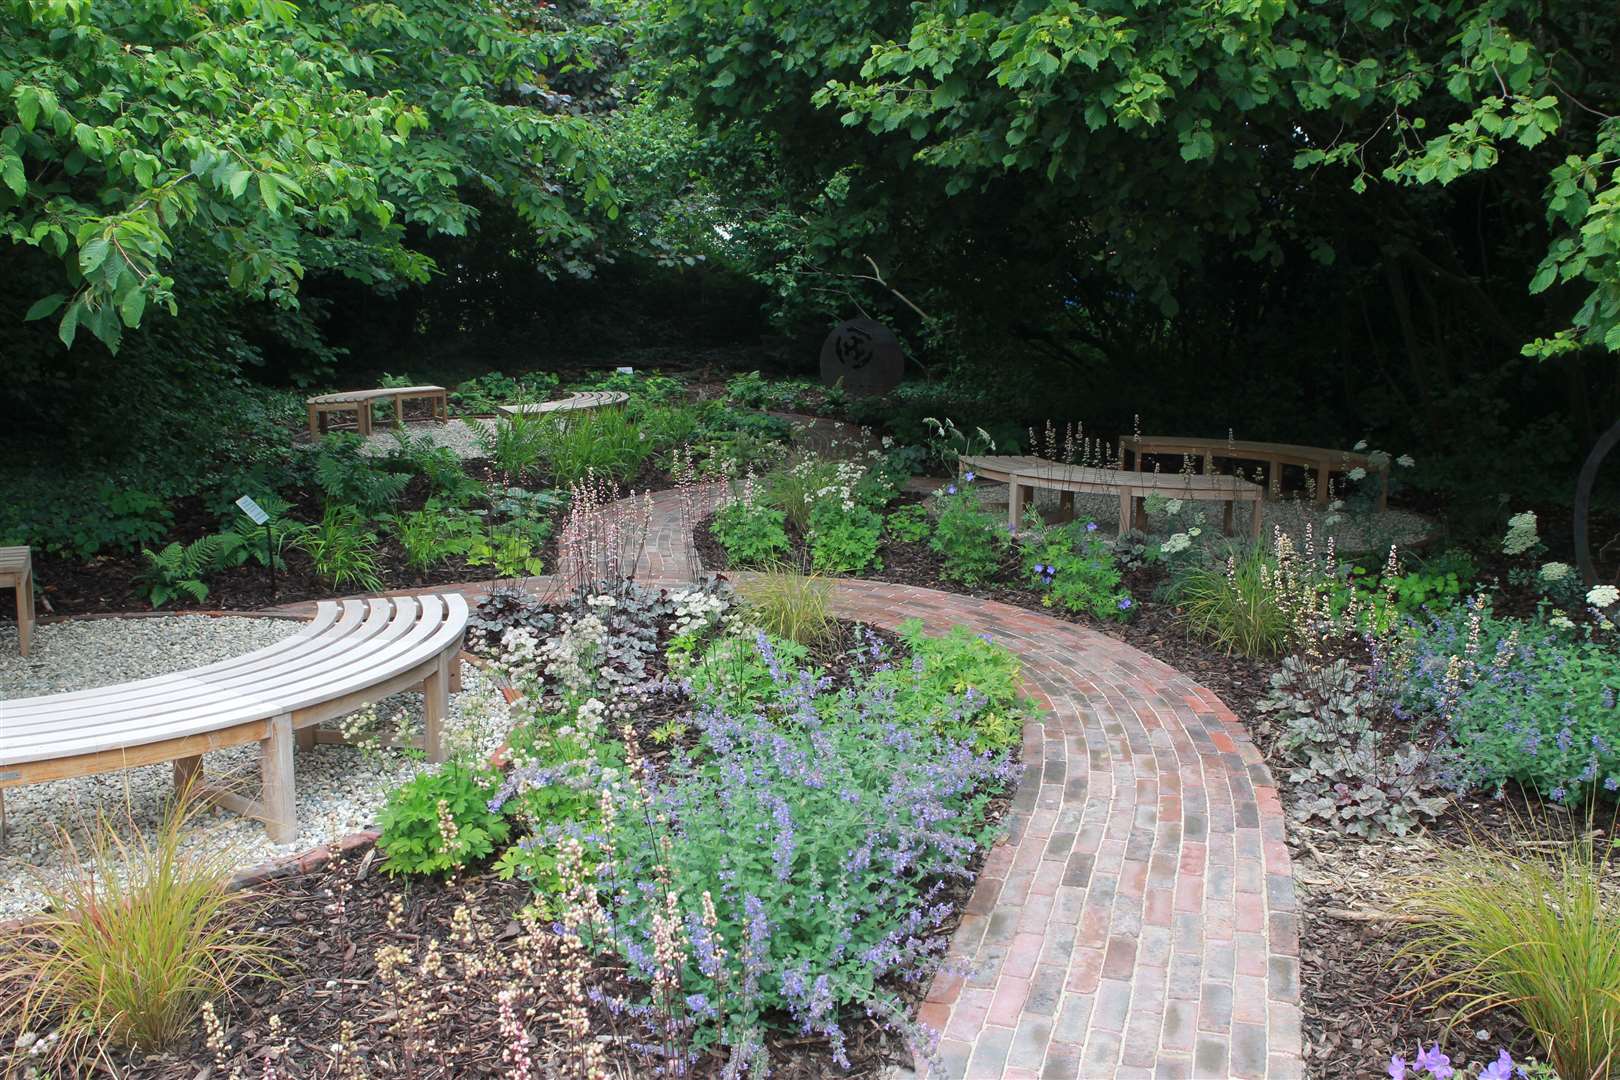 Grand opening of The Woodland Garden - An Open Space to Remember and Reflect at MGGS. Picture: John Westhrop. (13607544)